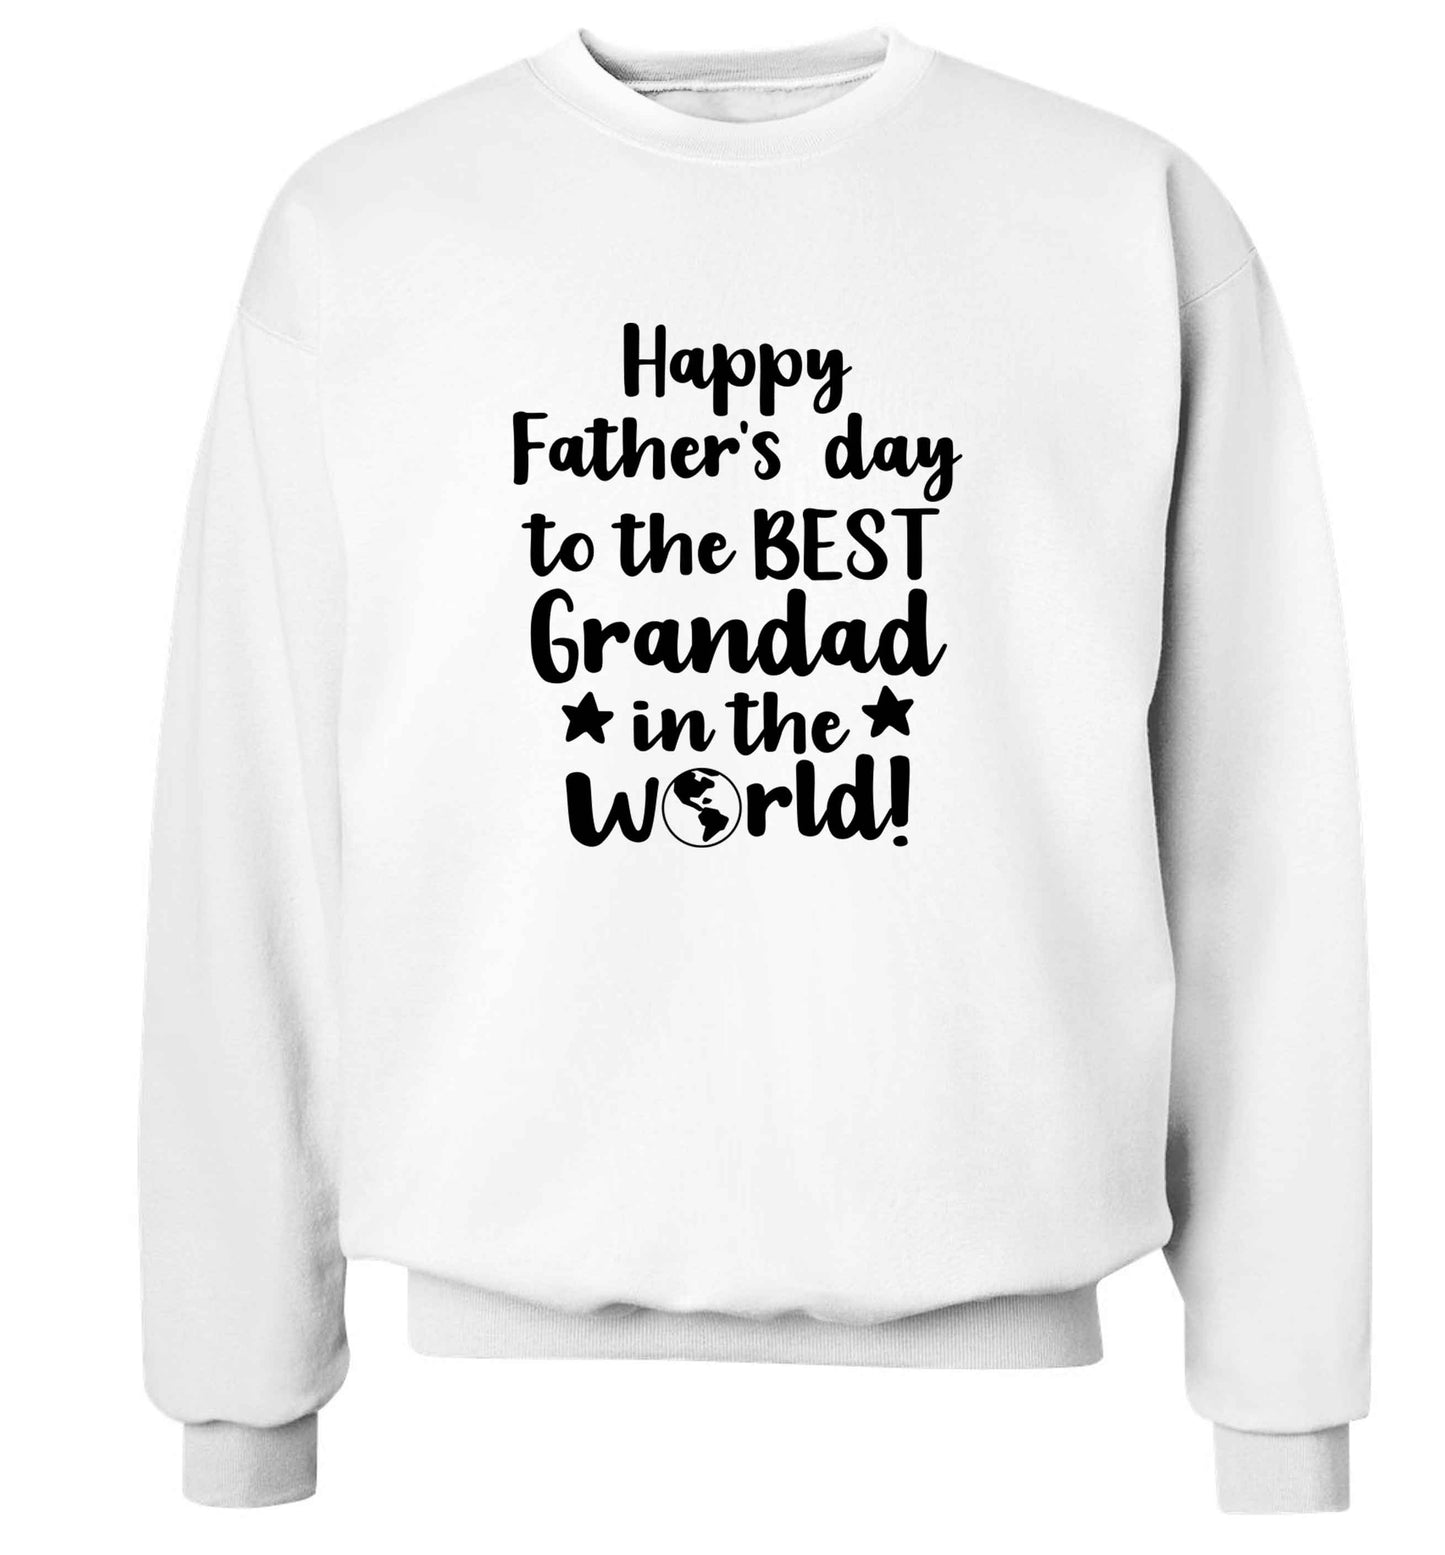 Happy Father's day to the best grandad in the world adult's unisex white sweater 2XL